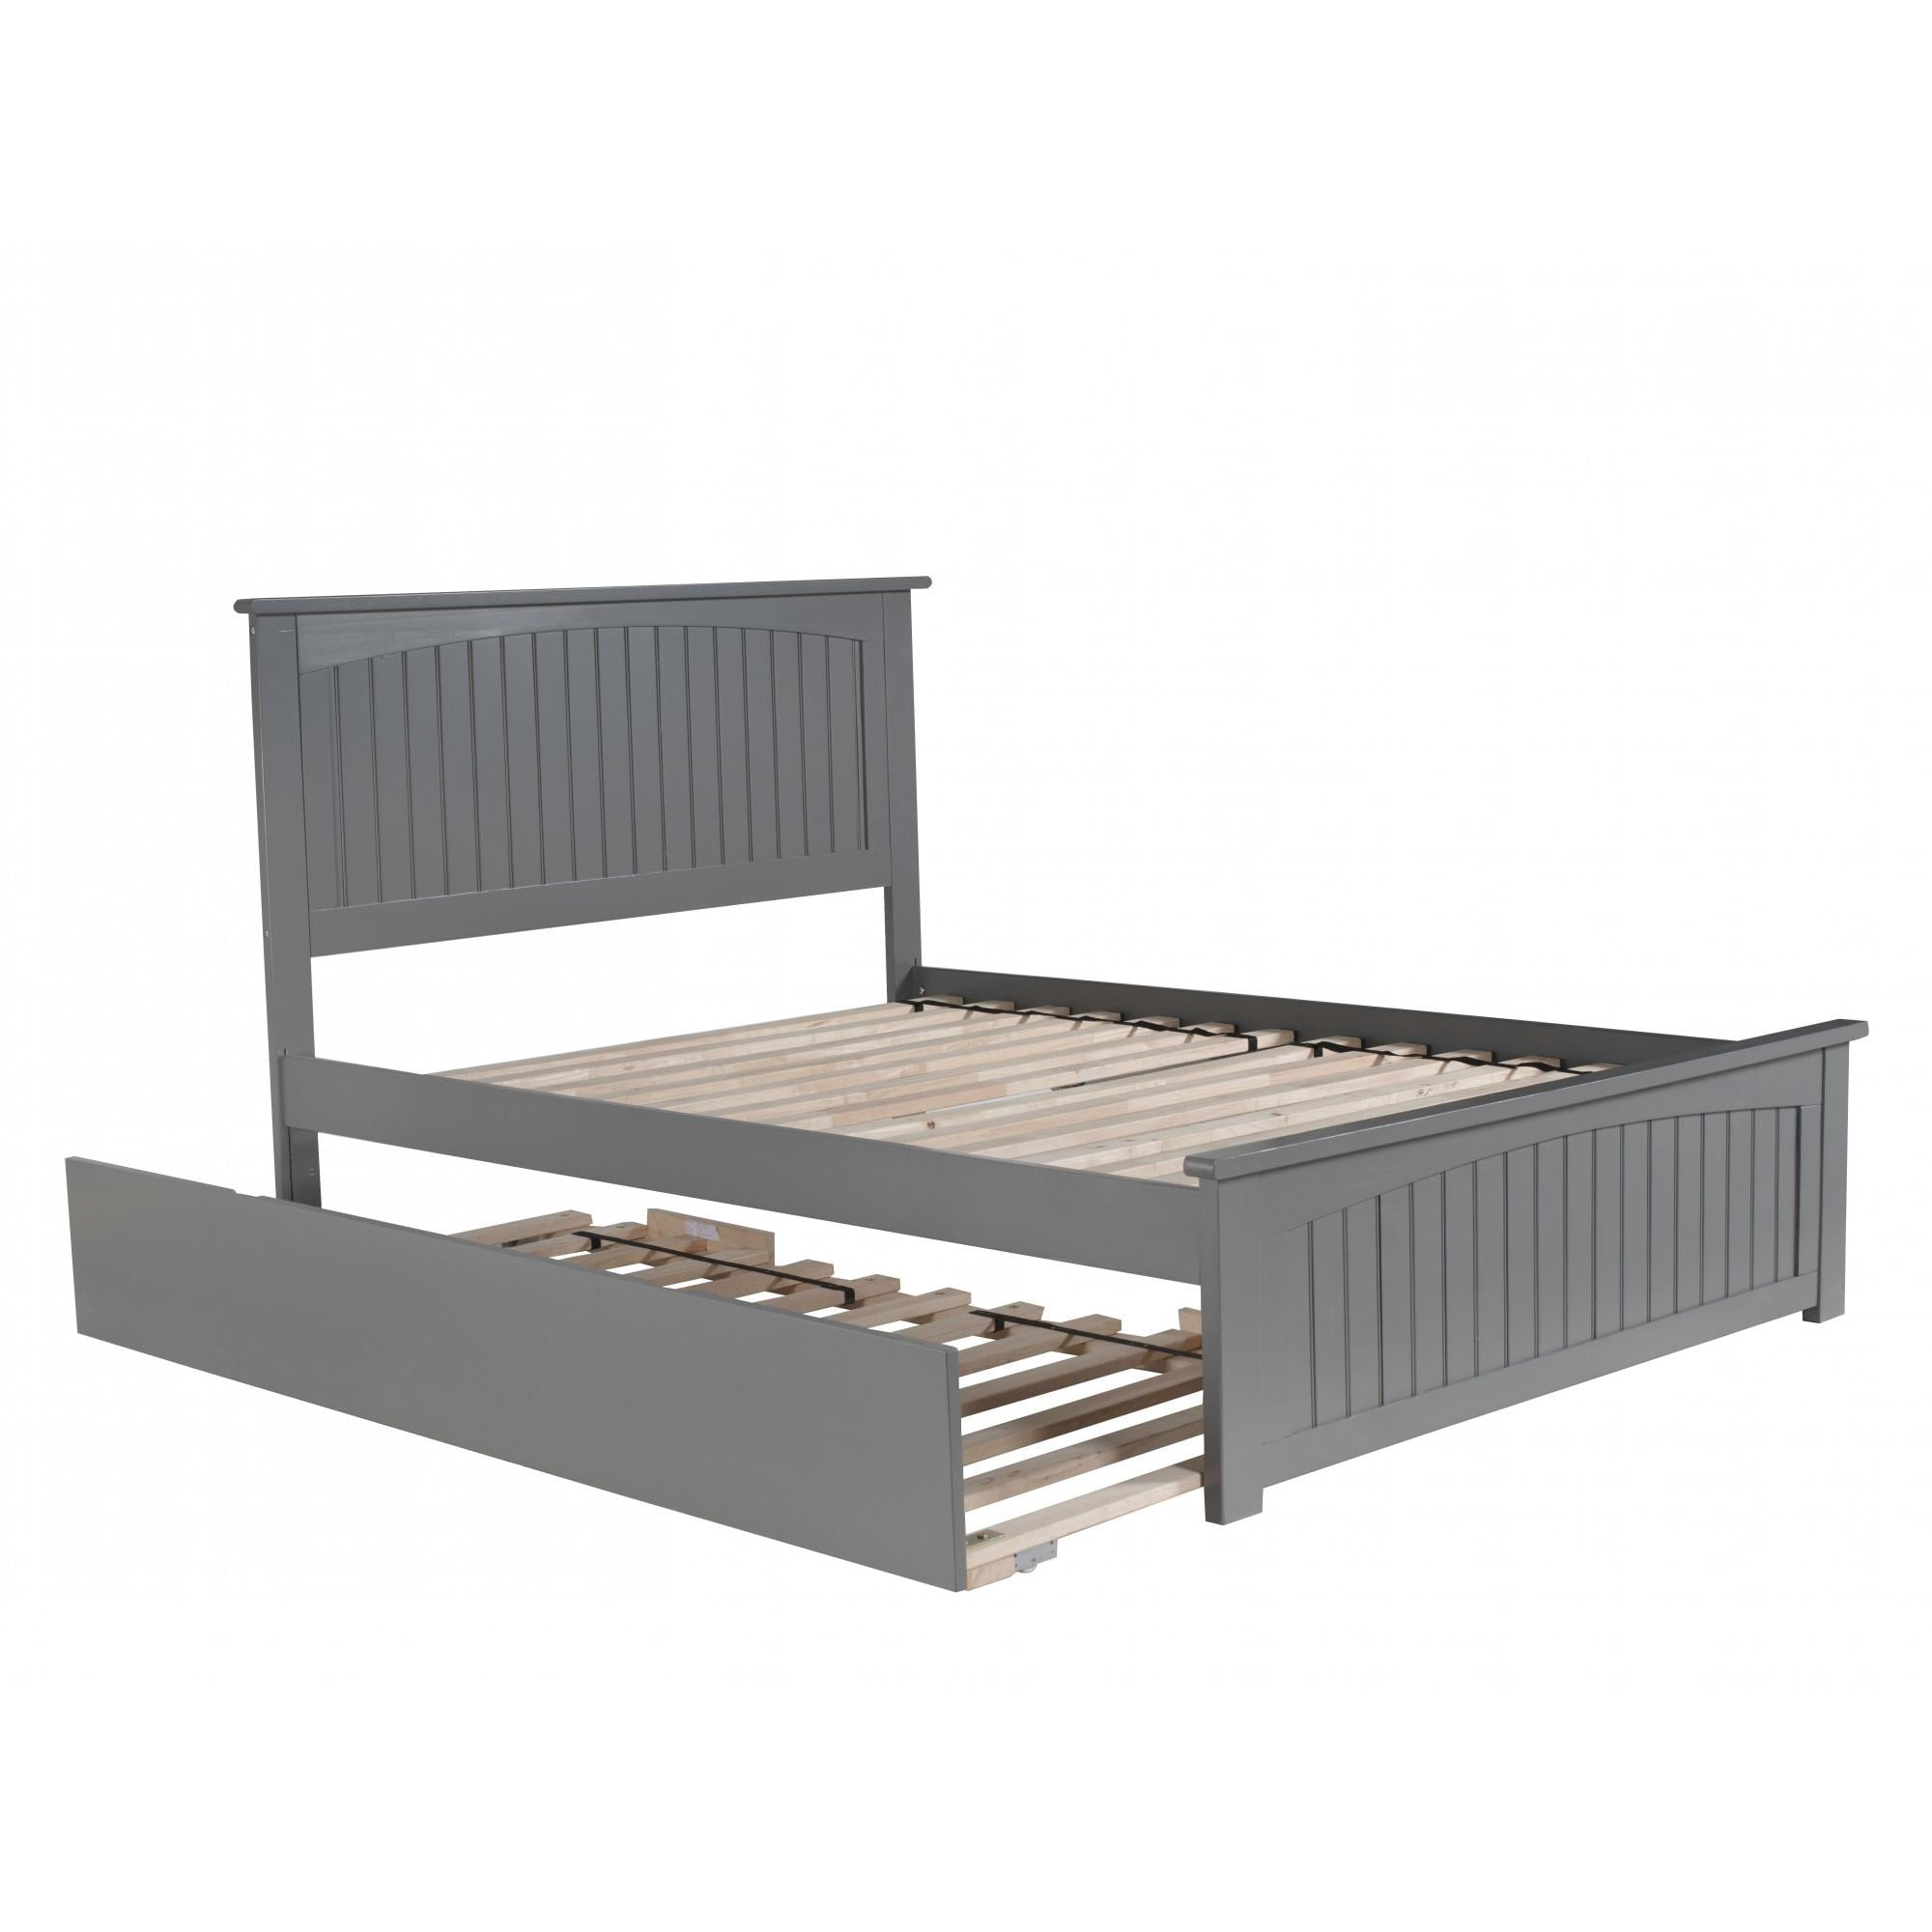 Atlantic AR8236019 Nantucket Full Platform Bed with Matching Foot Board with Twin Urban Trundle Bed - Grey